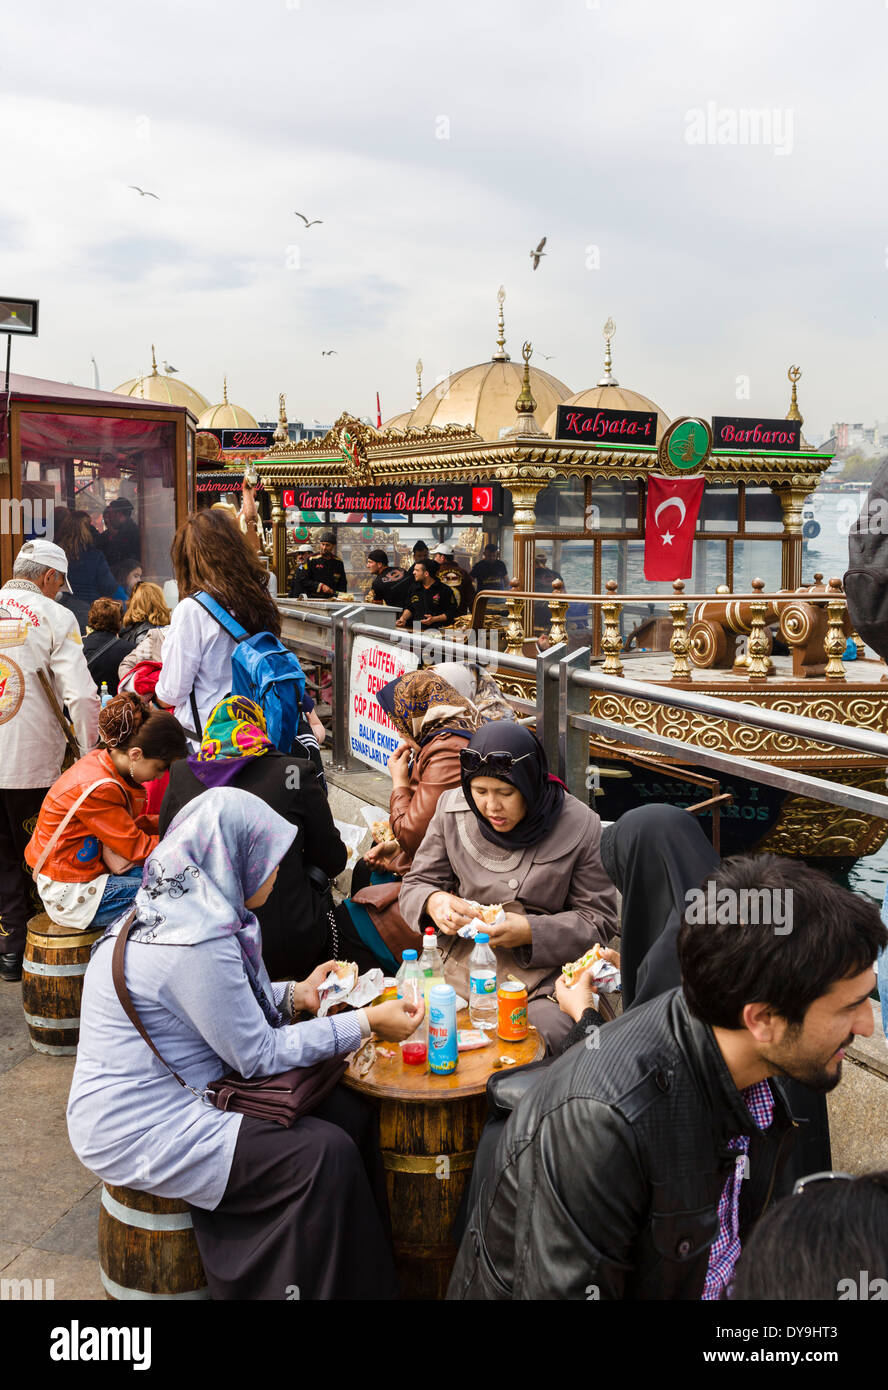 Locals and tourists eating from boats selling fish sandwiches near the Galata Bridge, Eminonu district, Istanbul, Turkey Stock Photo